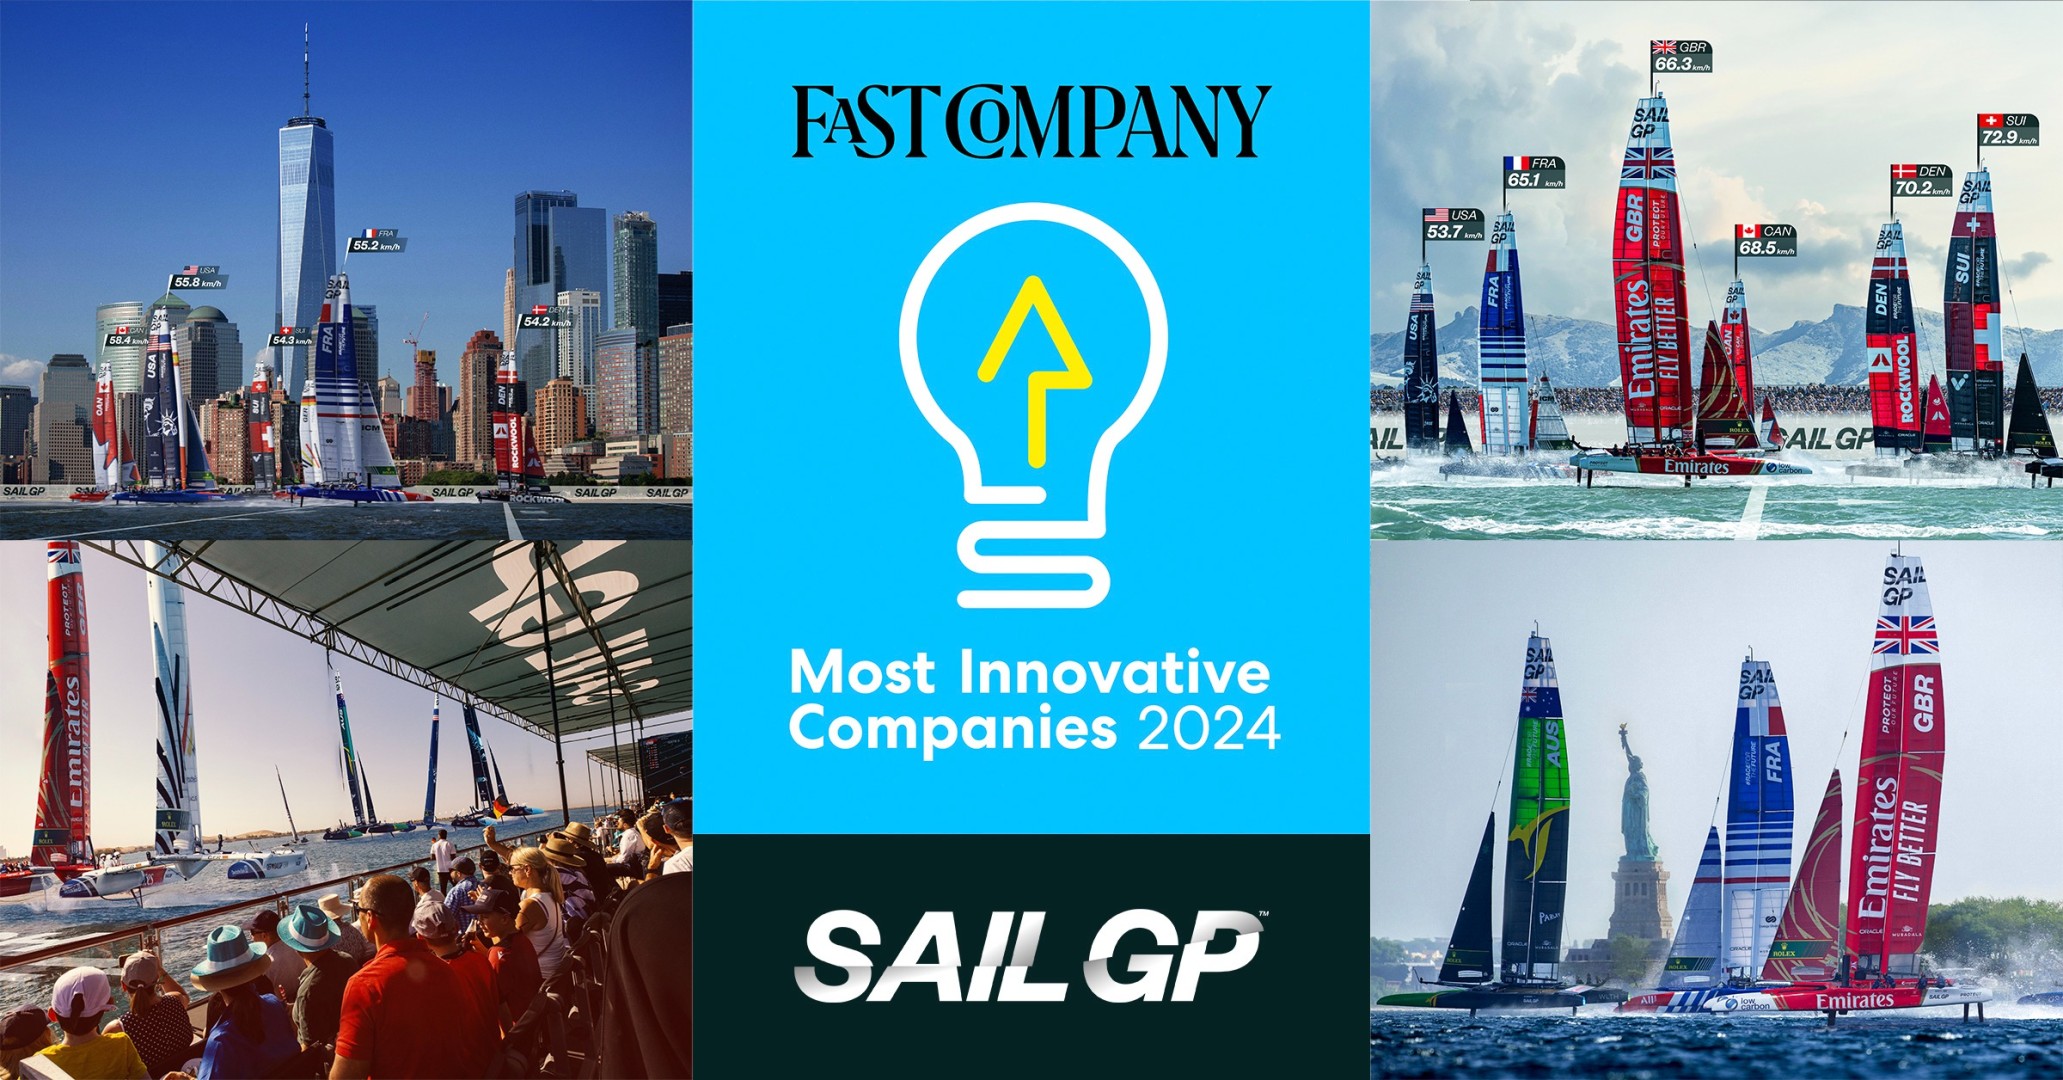 SailGP named to Fast Company’s Annual List of the World’s Most Innovative Companies of 2024